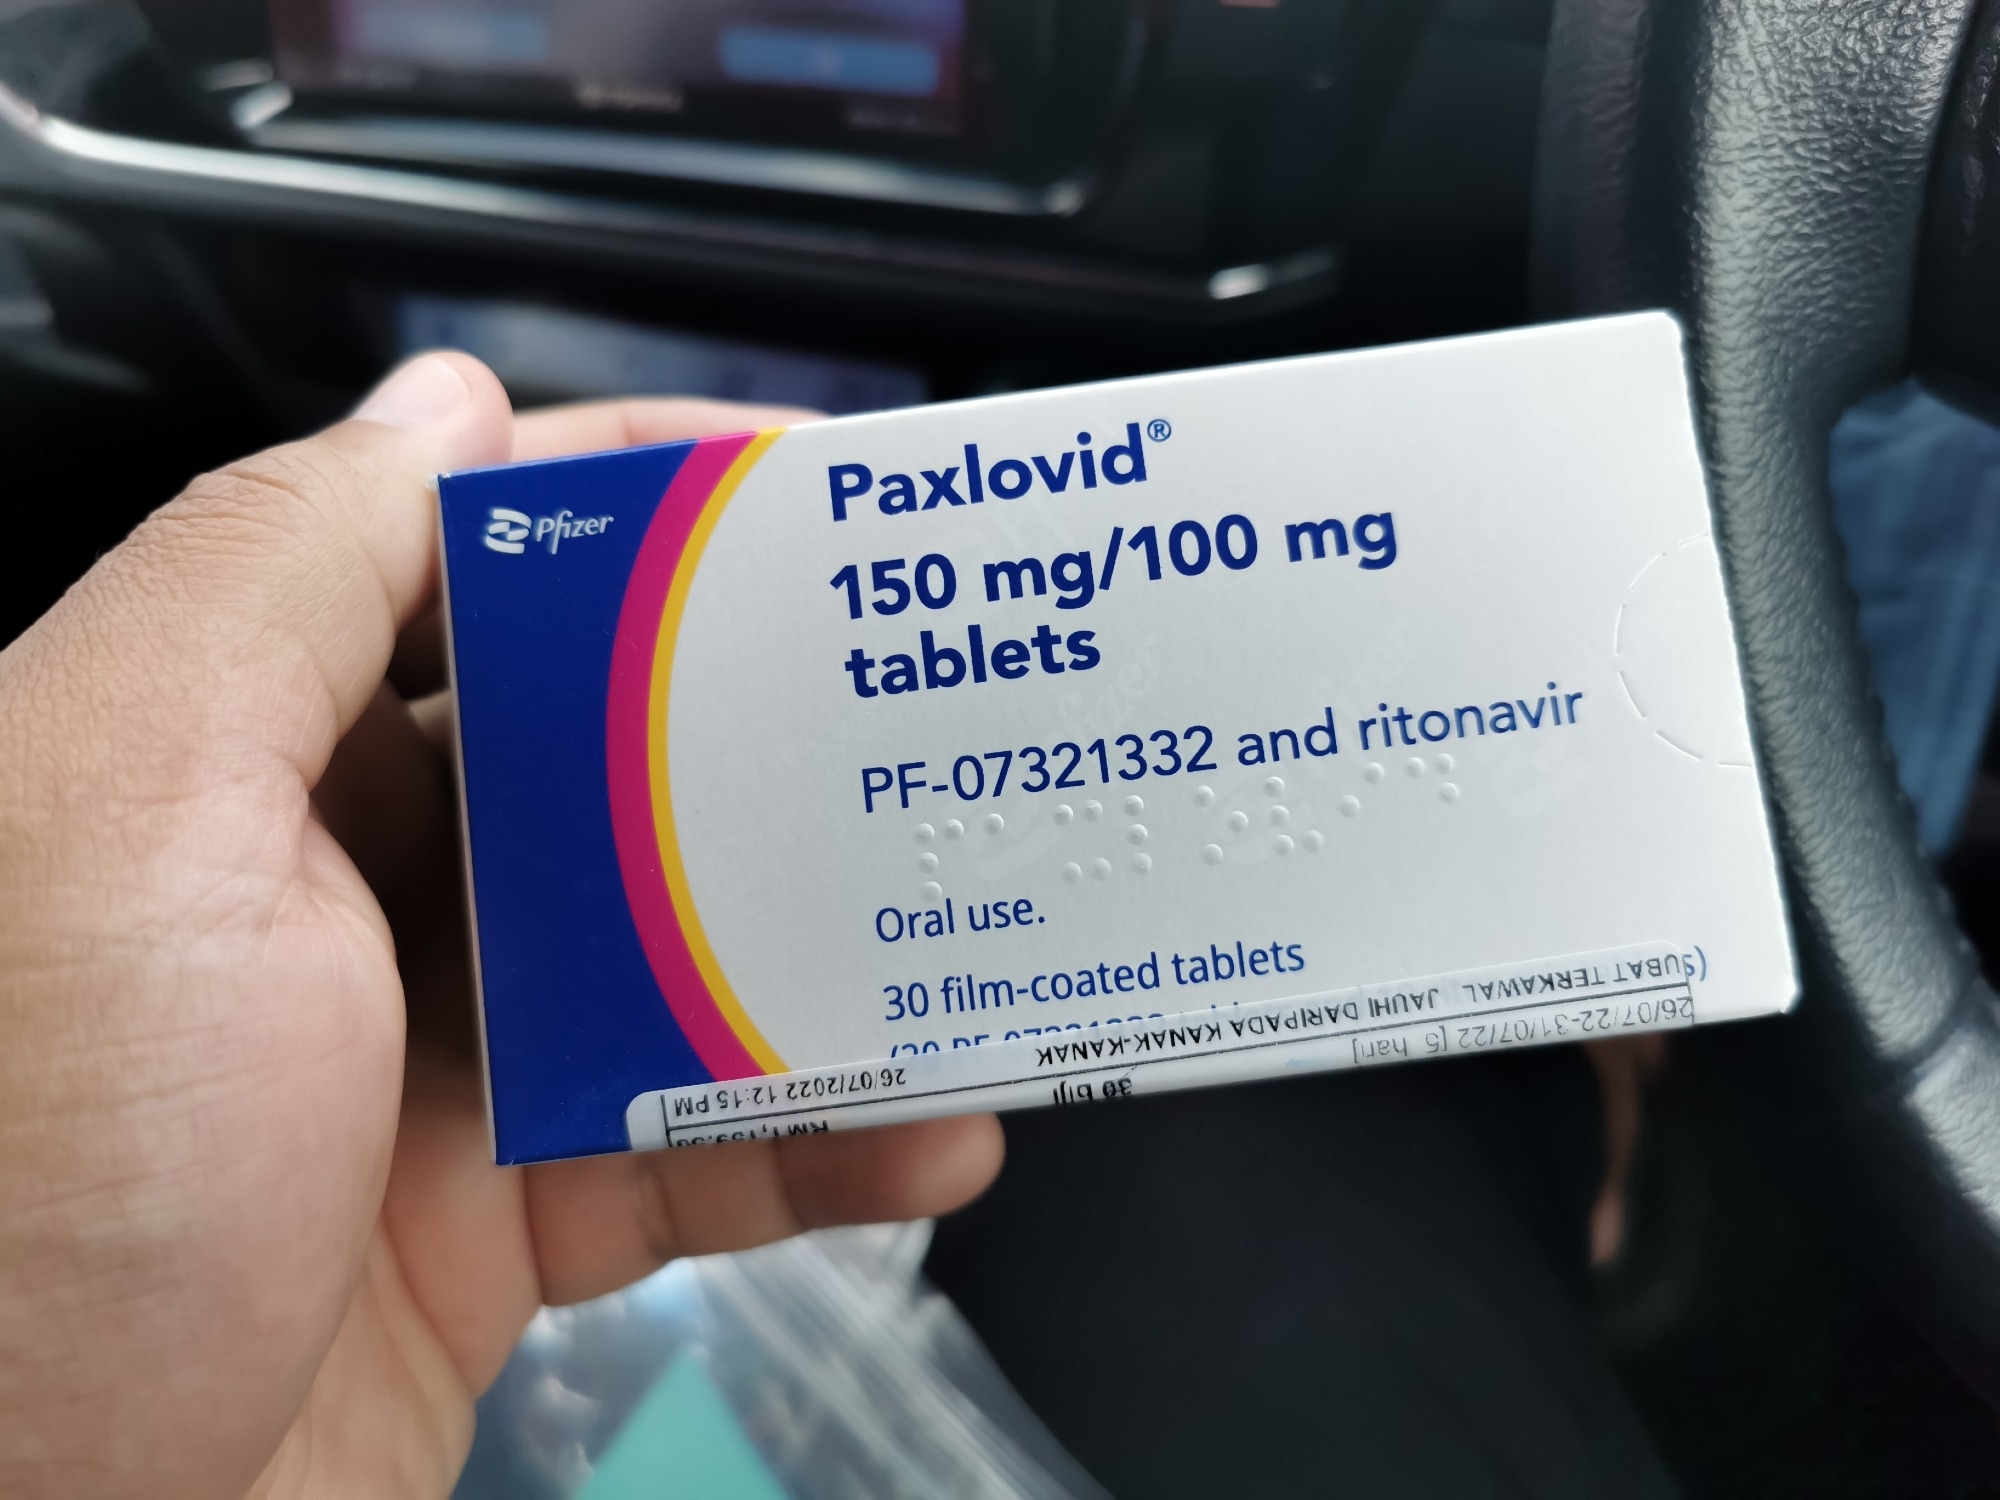 Study: The Paxlovid Rebound Study: A Prospective Cohort Study to Evaluate Viral and Symptom Rebound Differences Between Paxlovid and Untreated COVID-19 Participants. Image Credit: ahmad.faizal/Shutterstock